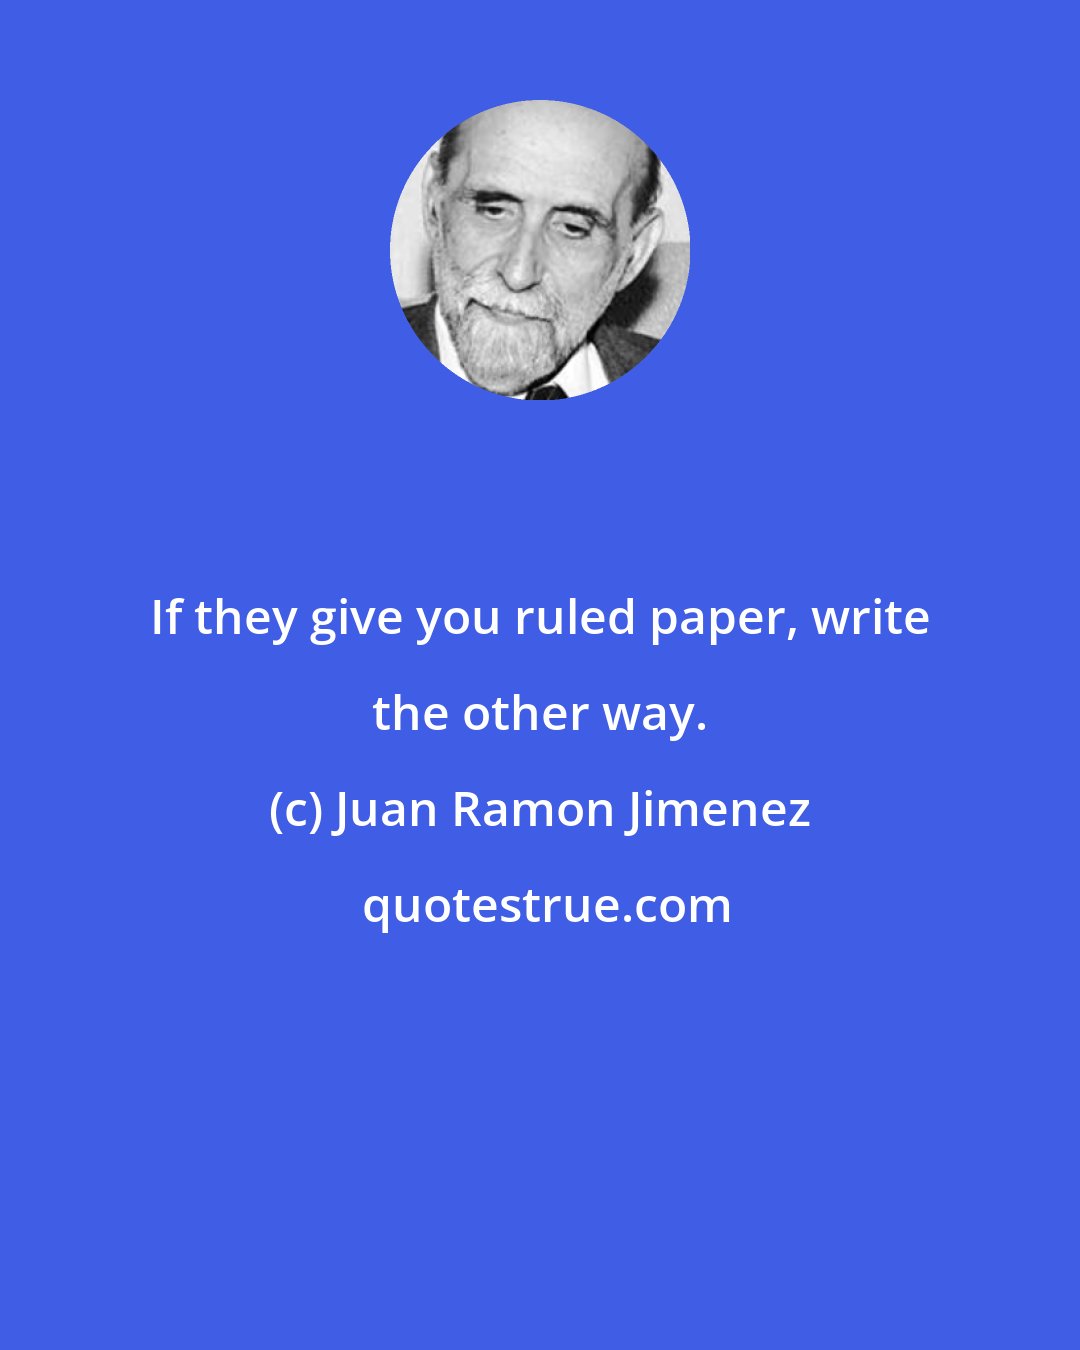 Juan Ramon Jimenez: If they give you ruled paper, write the other way.